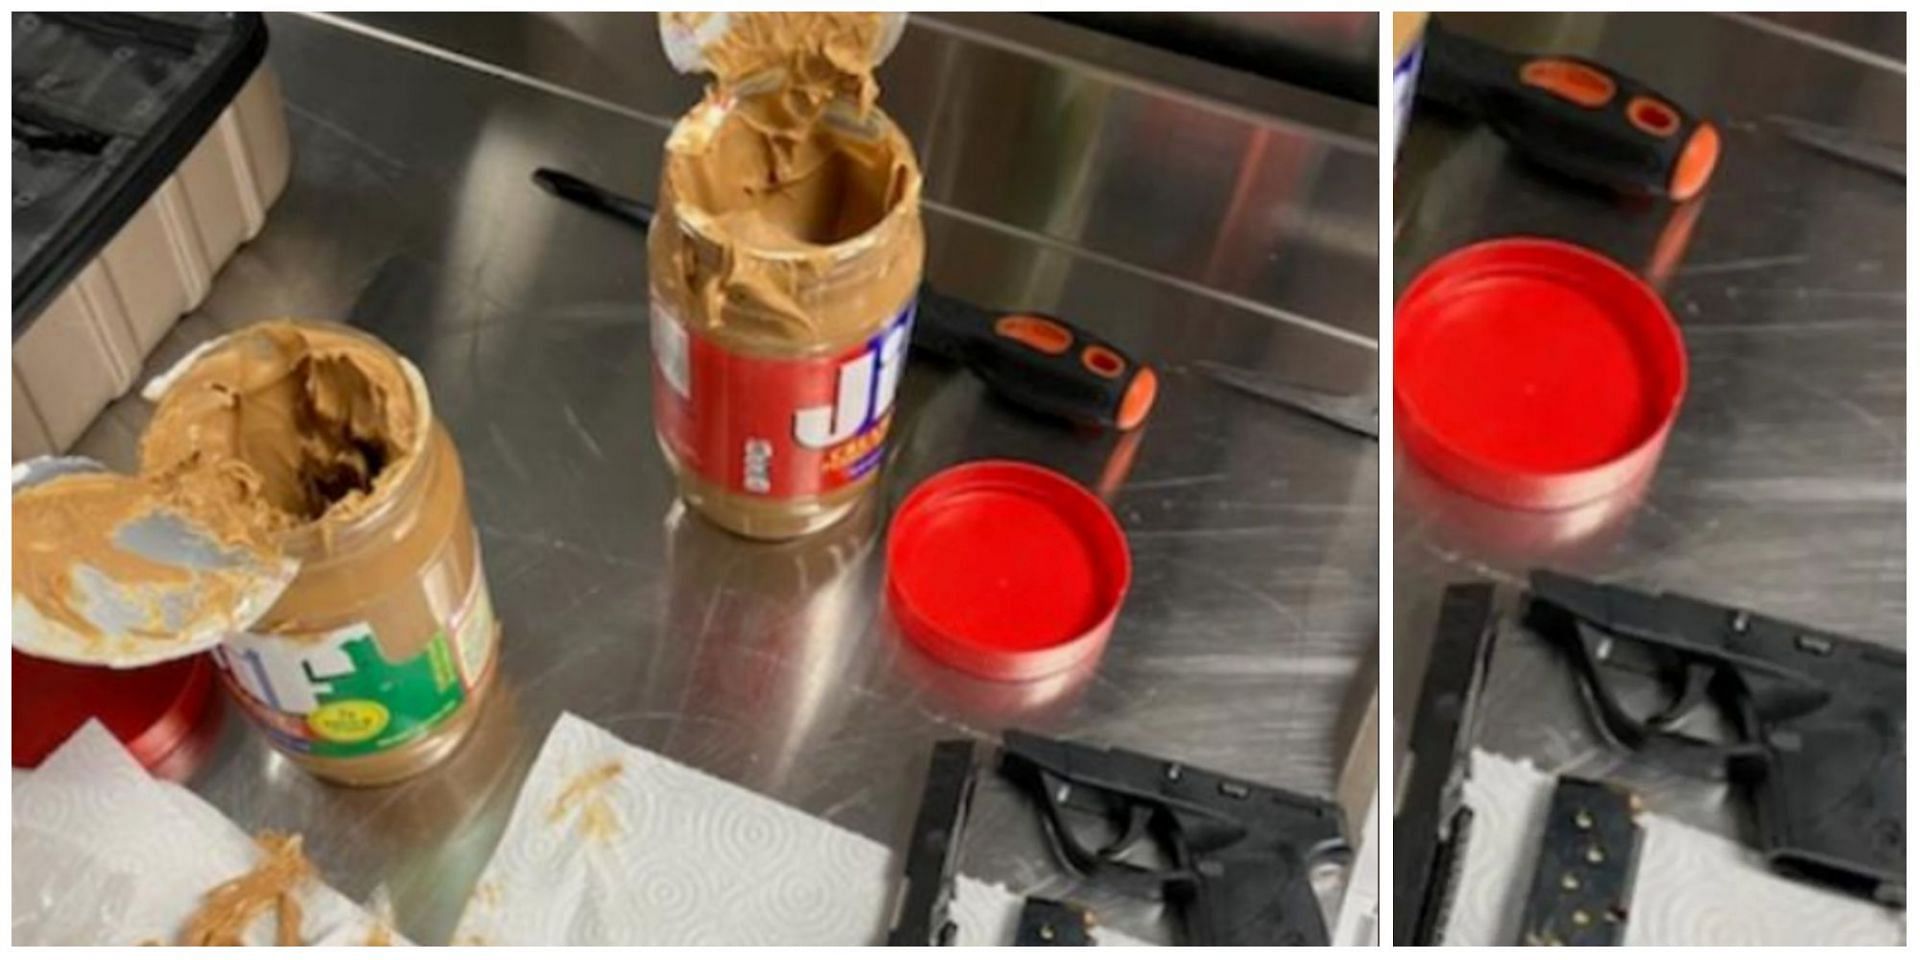 Man arrested from JFK Airport after police found parts of a gun in 2 peanut butter jars in his luggage. (Image via Lisa Farbstein/Twitter)